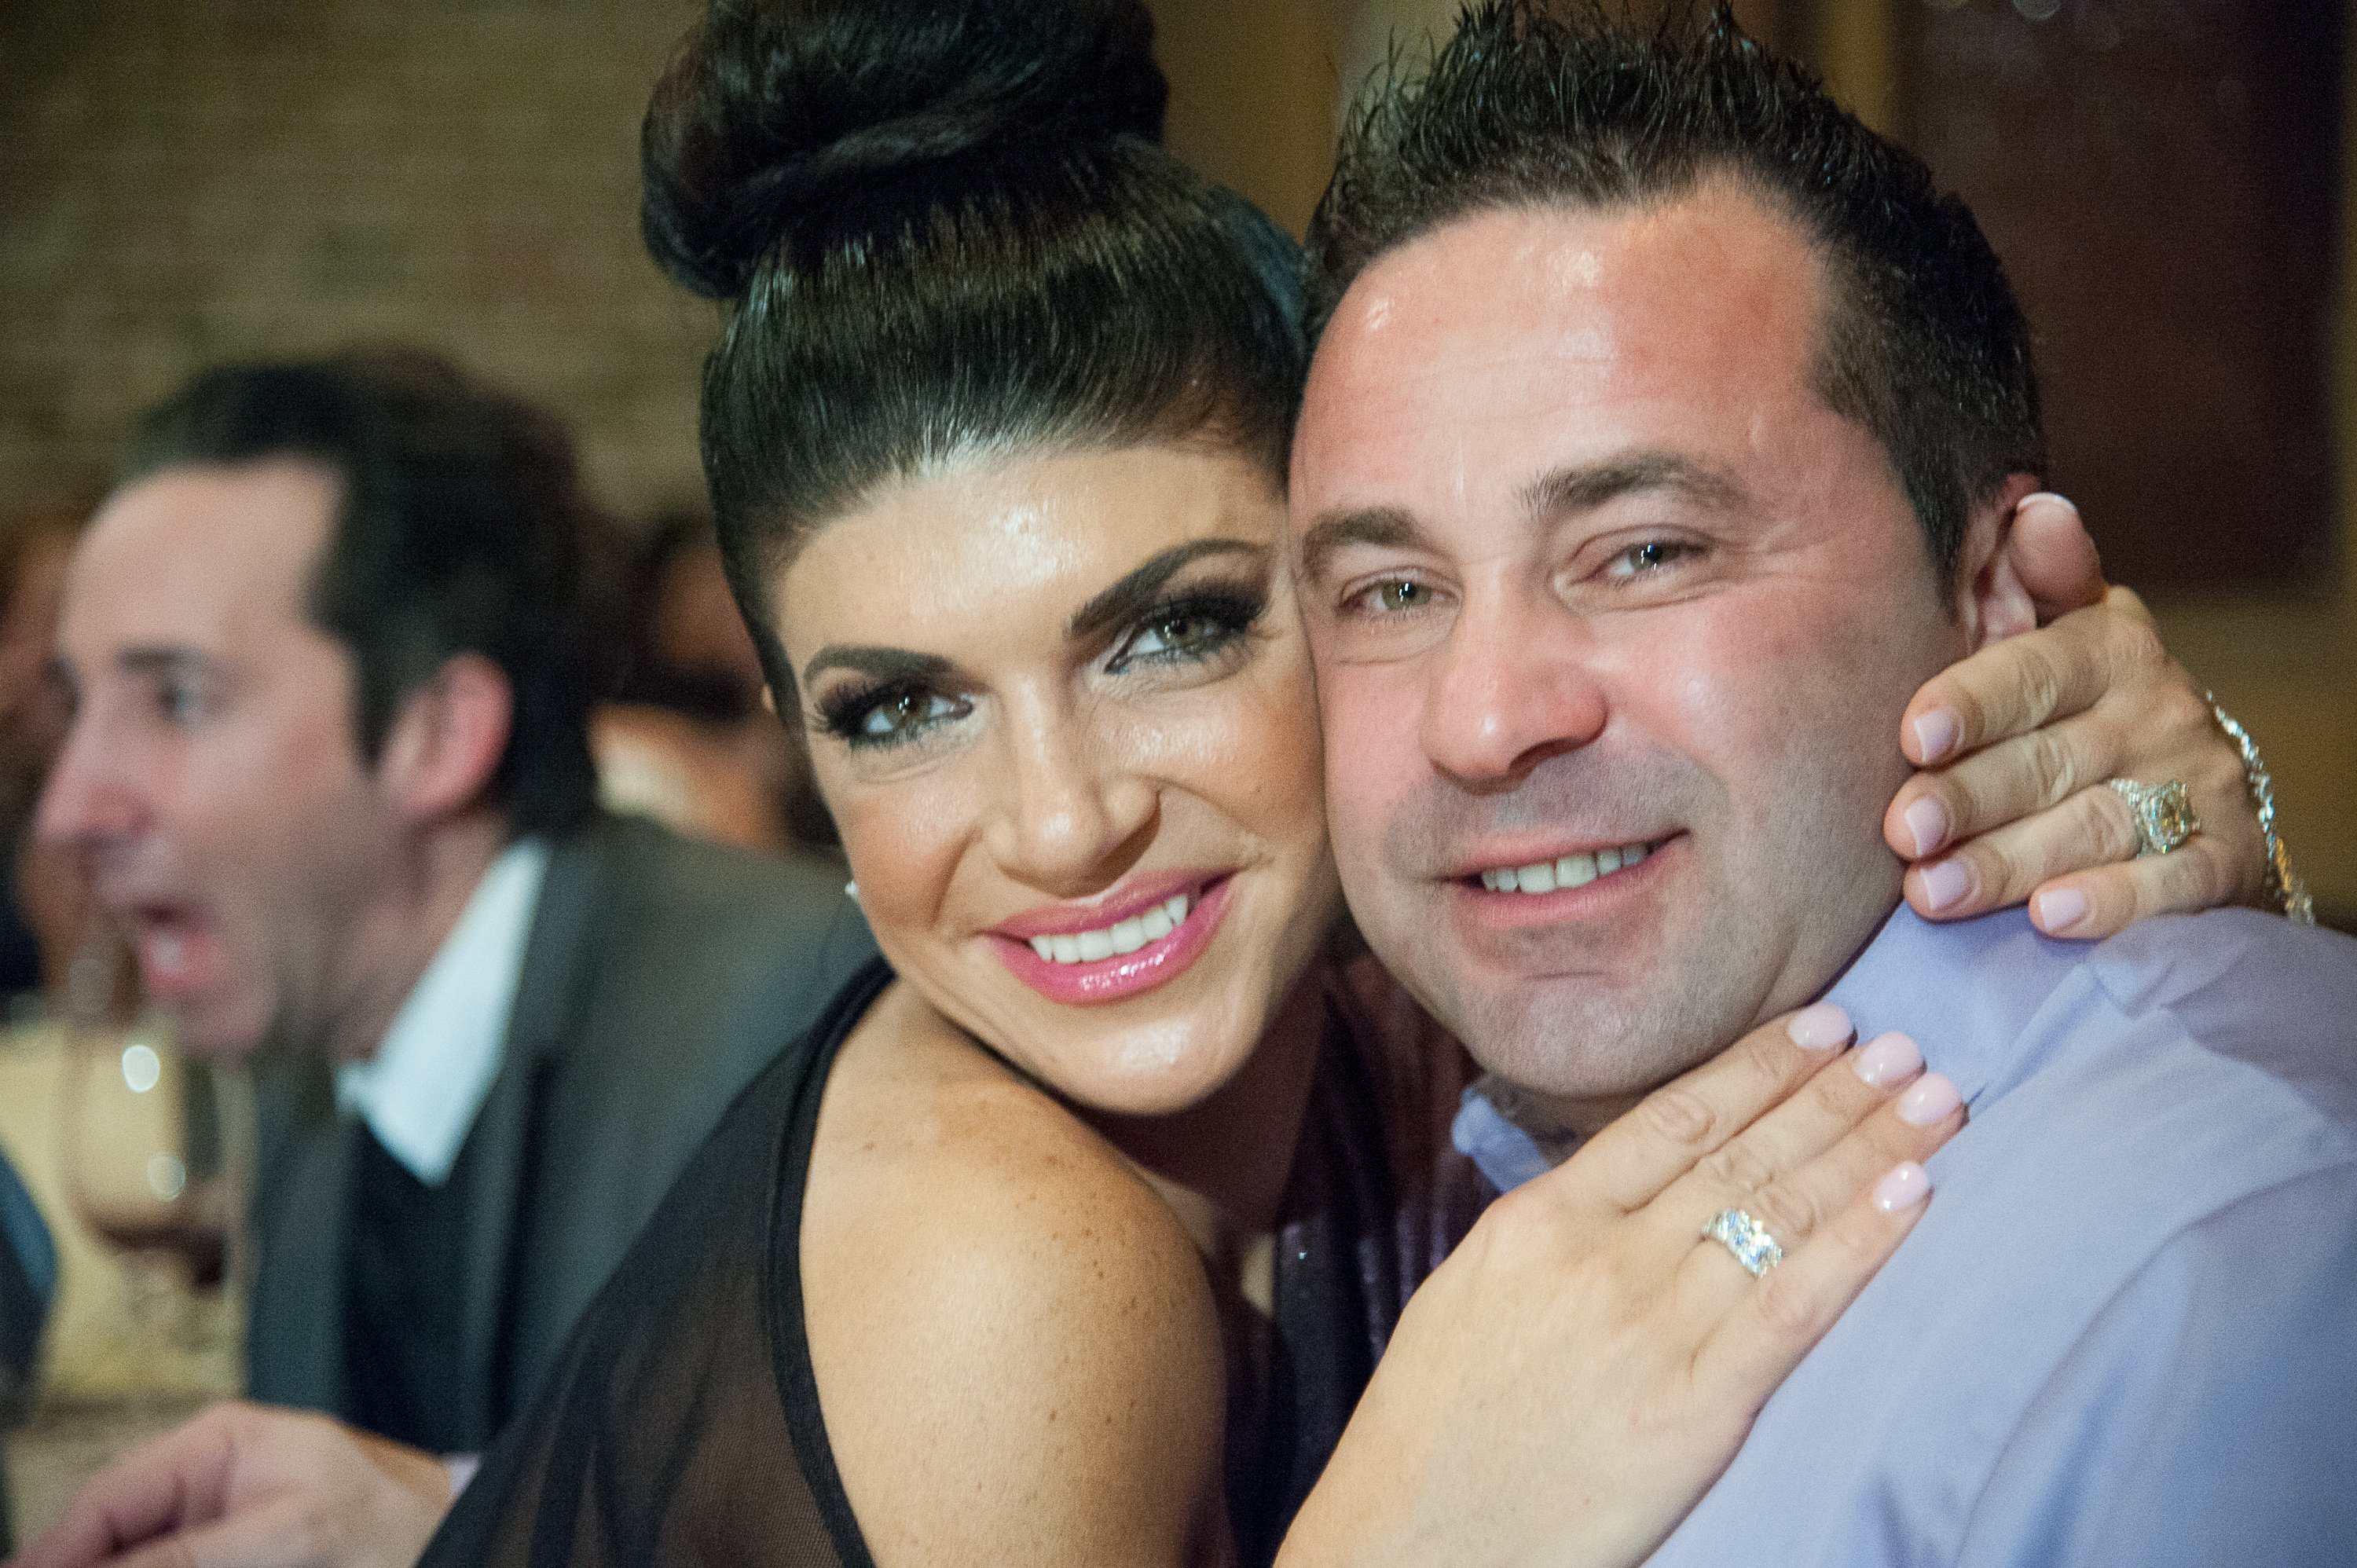 Teresa Giudice and Joe Giudice attend the Posche Fashion show at The Bottagra on December 3, 2012. | Source: Getty Images